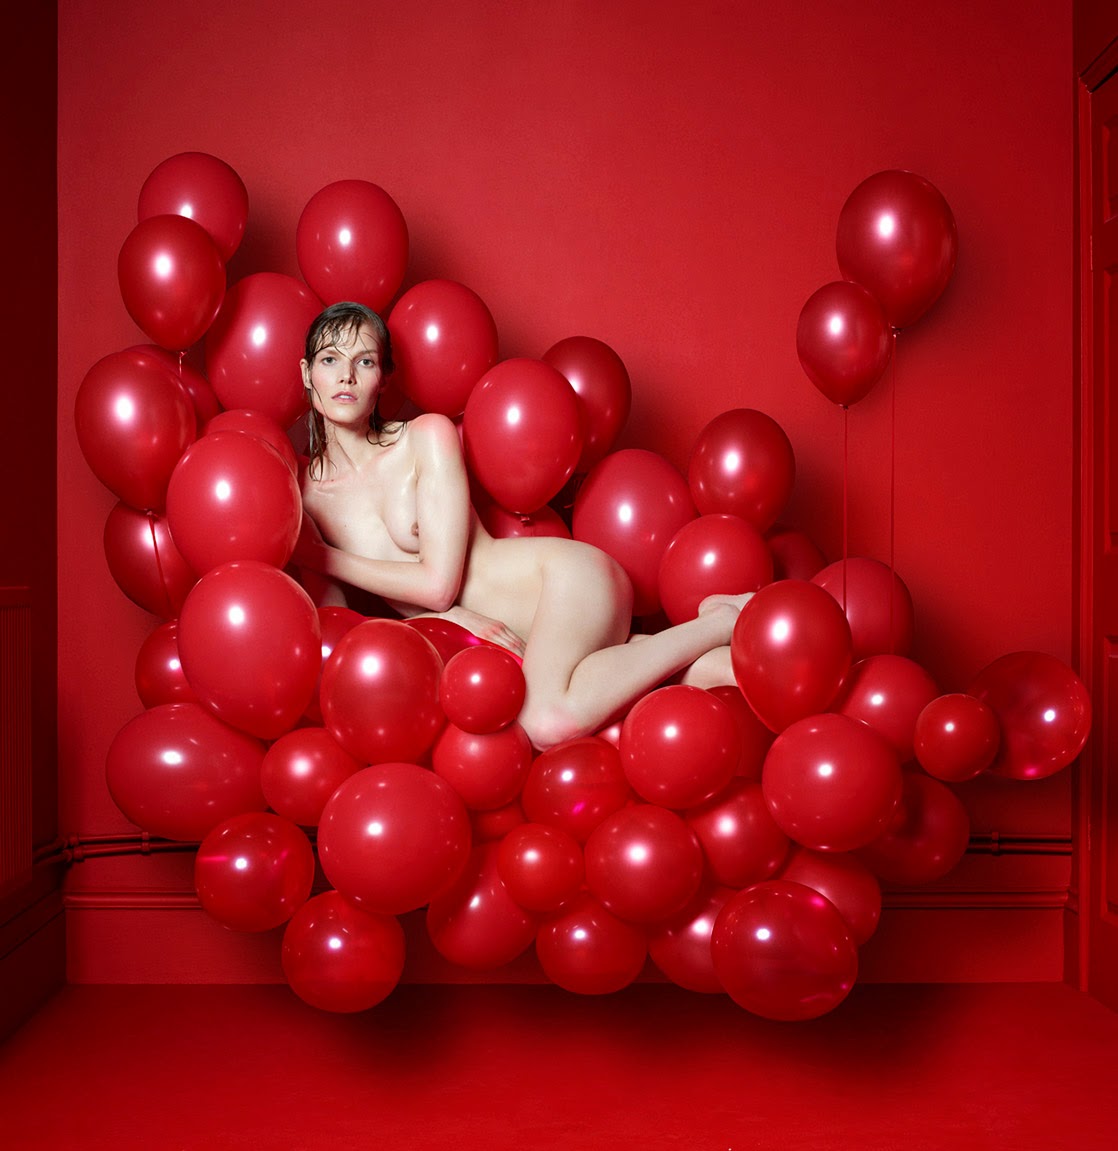 ©Cuneyt Akeroglu - The Red Room Project. Fashion Photography